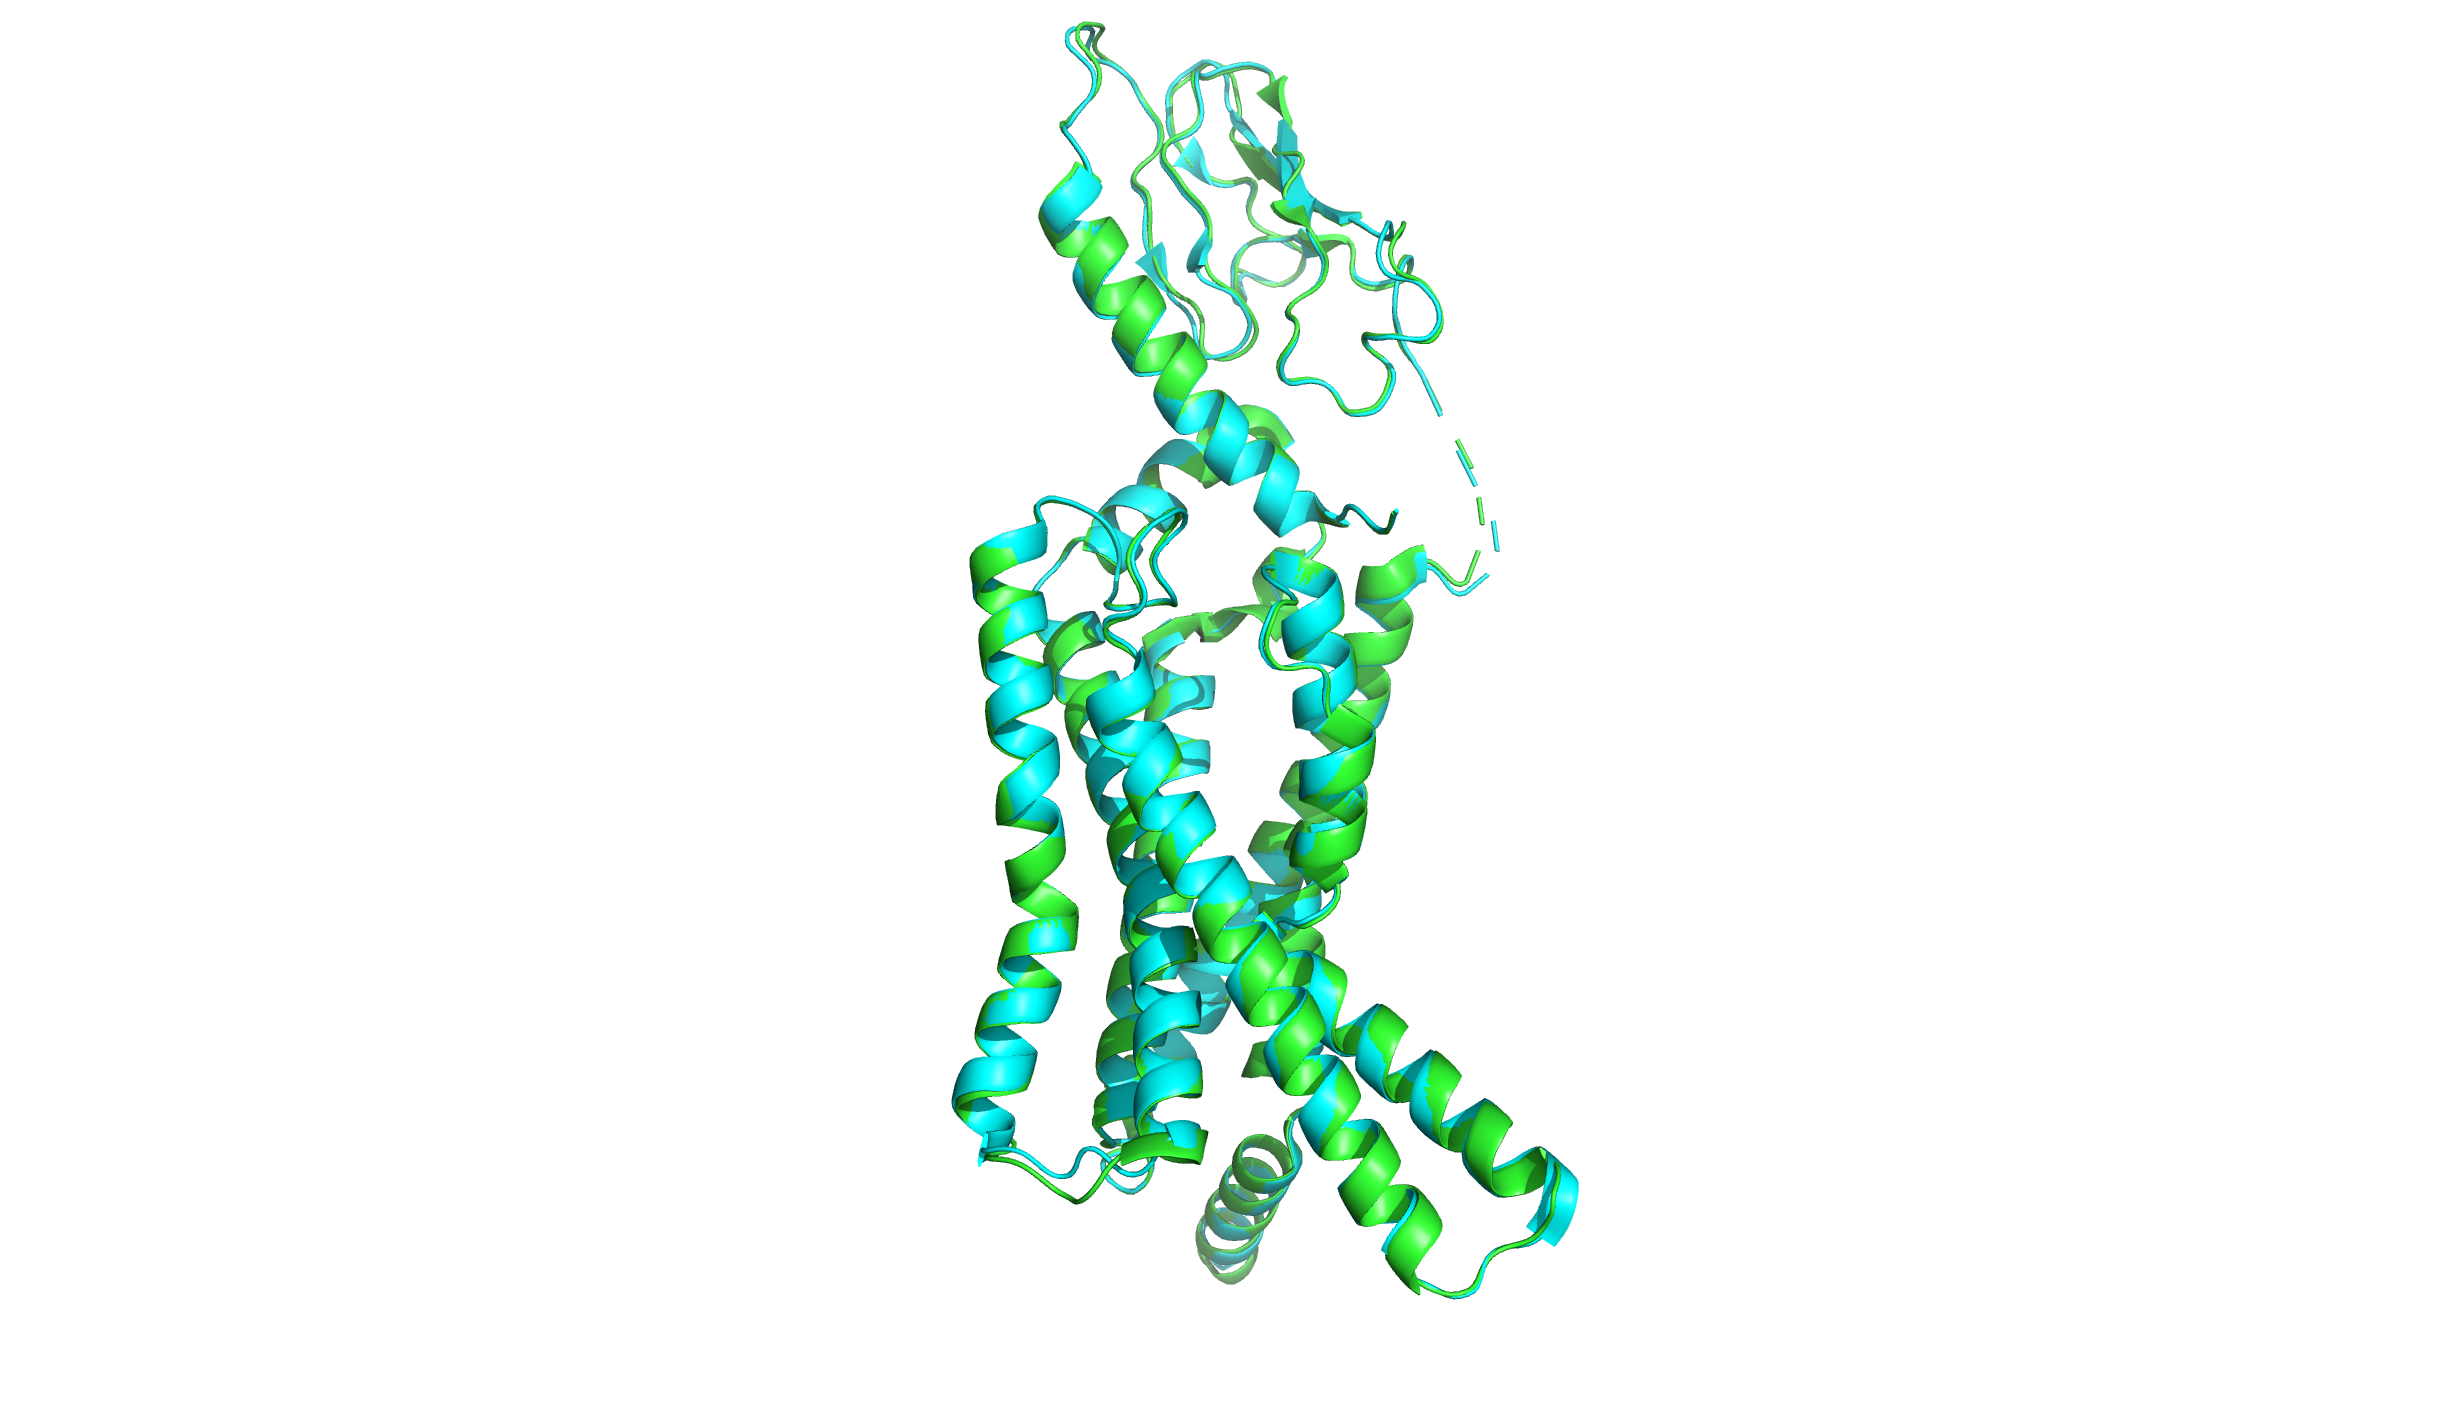  Two proteins aligned using PyMOL